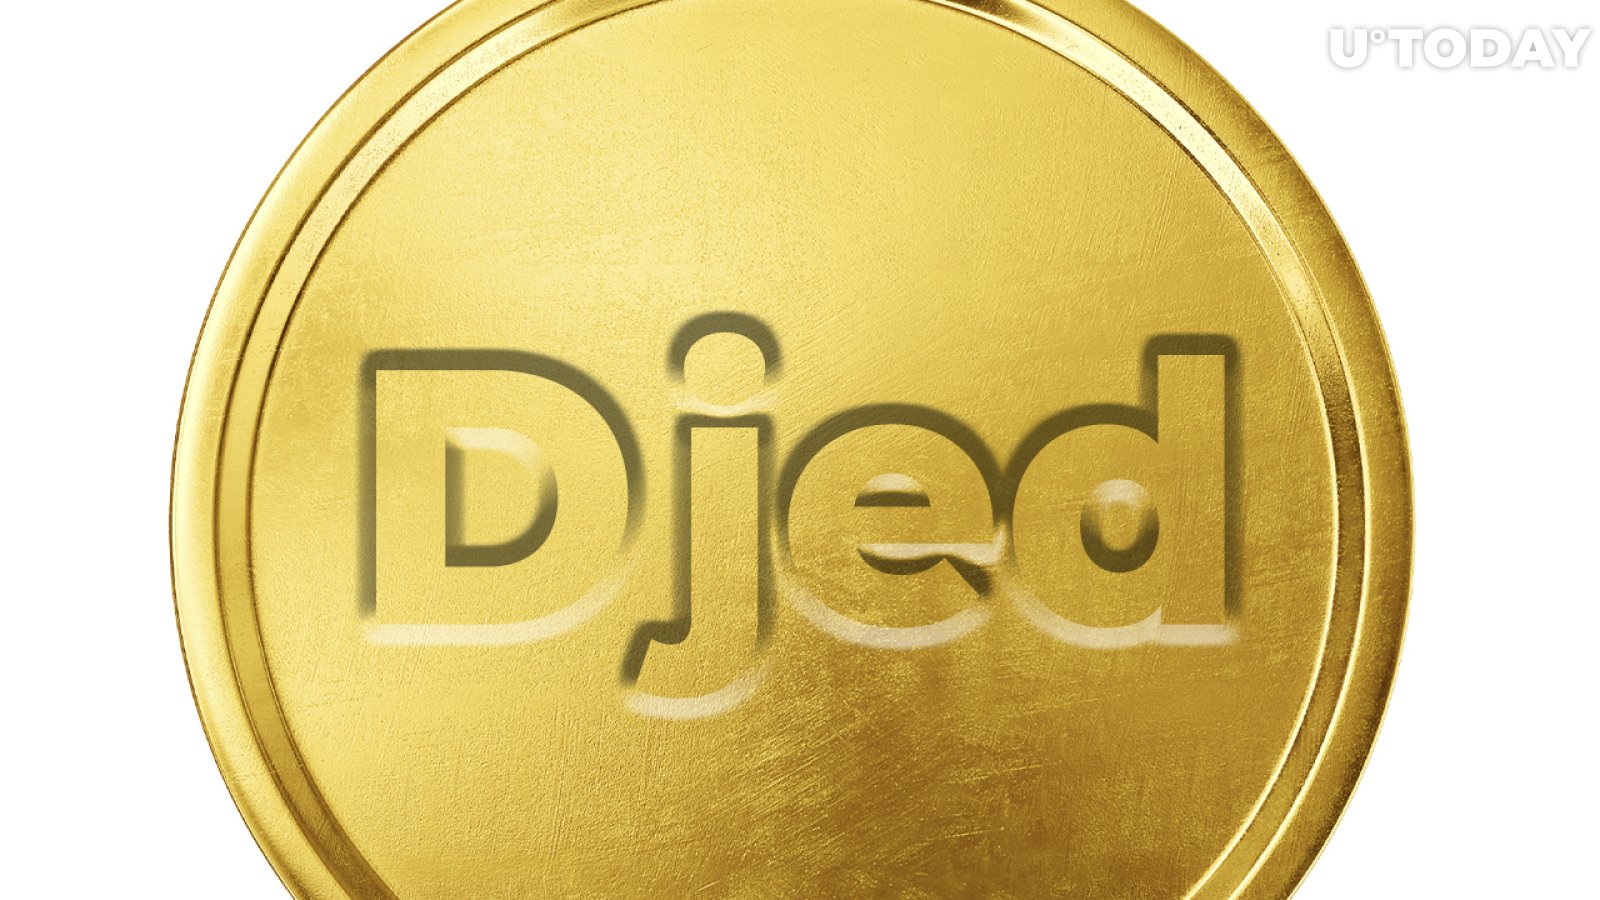 AdaSwap DEX Builder Partners with Cardano's First Stablecoin, Djed